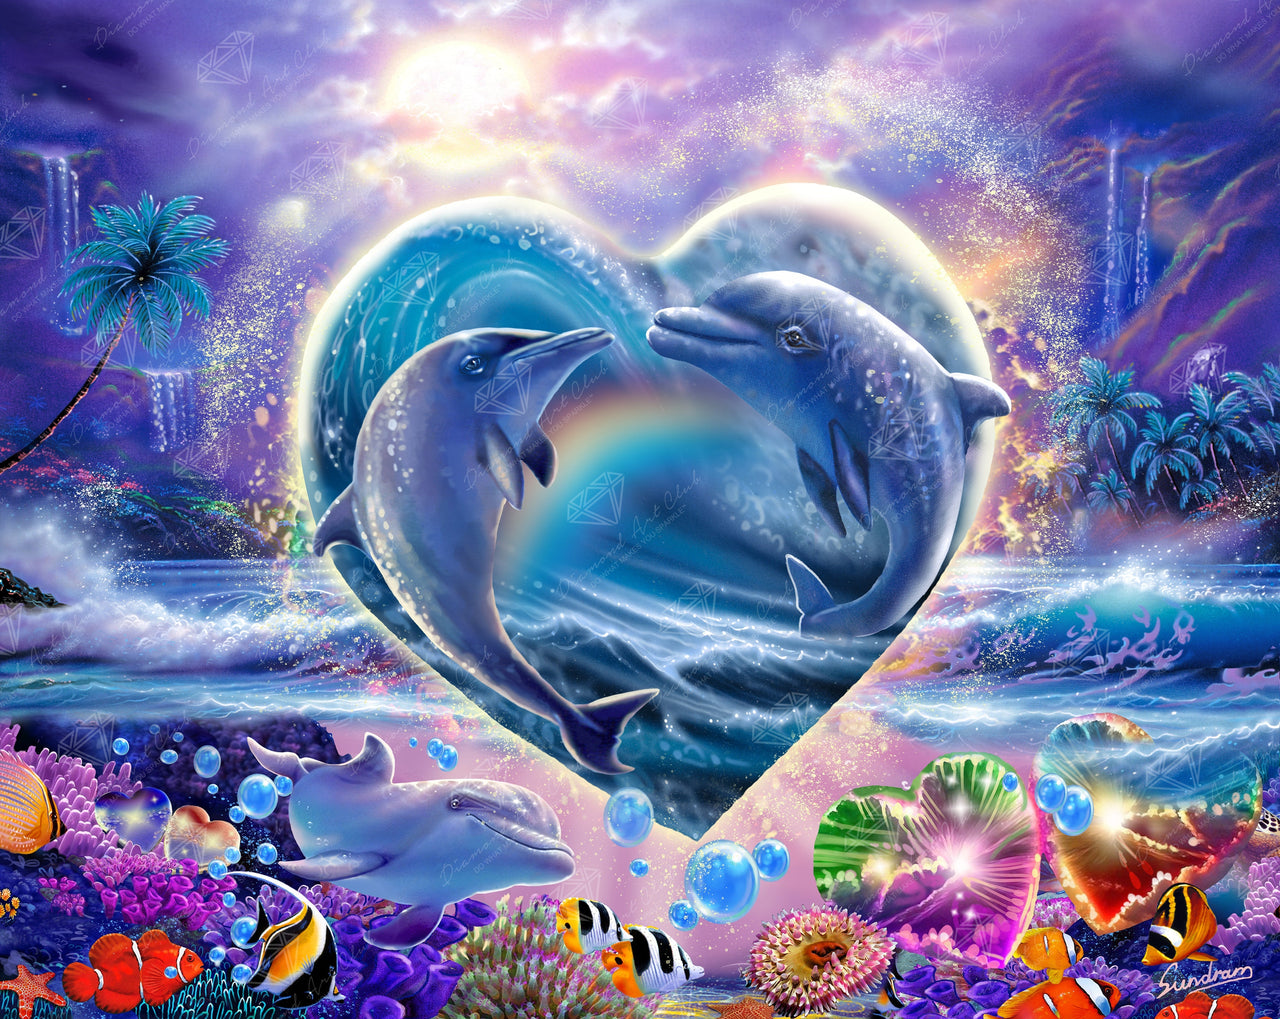 Diamond Painting Dolphins In Love 34.7" x 27.6" (88cm x 70cm) / Square with 67 Colors including 5 ABs and 2 Fairy Dust Diamonds / 99,193